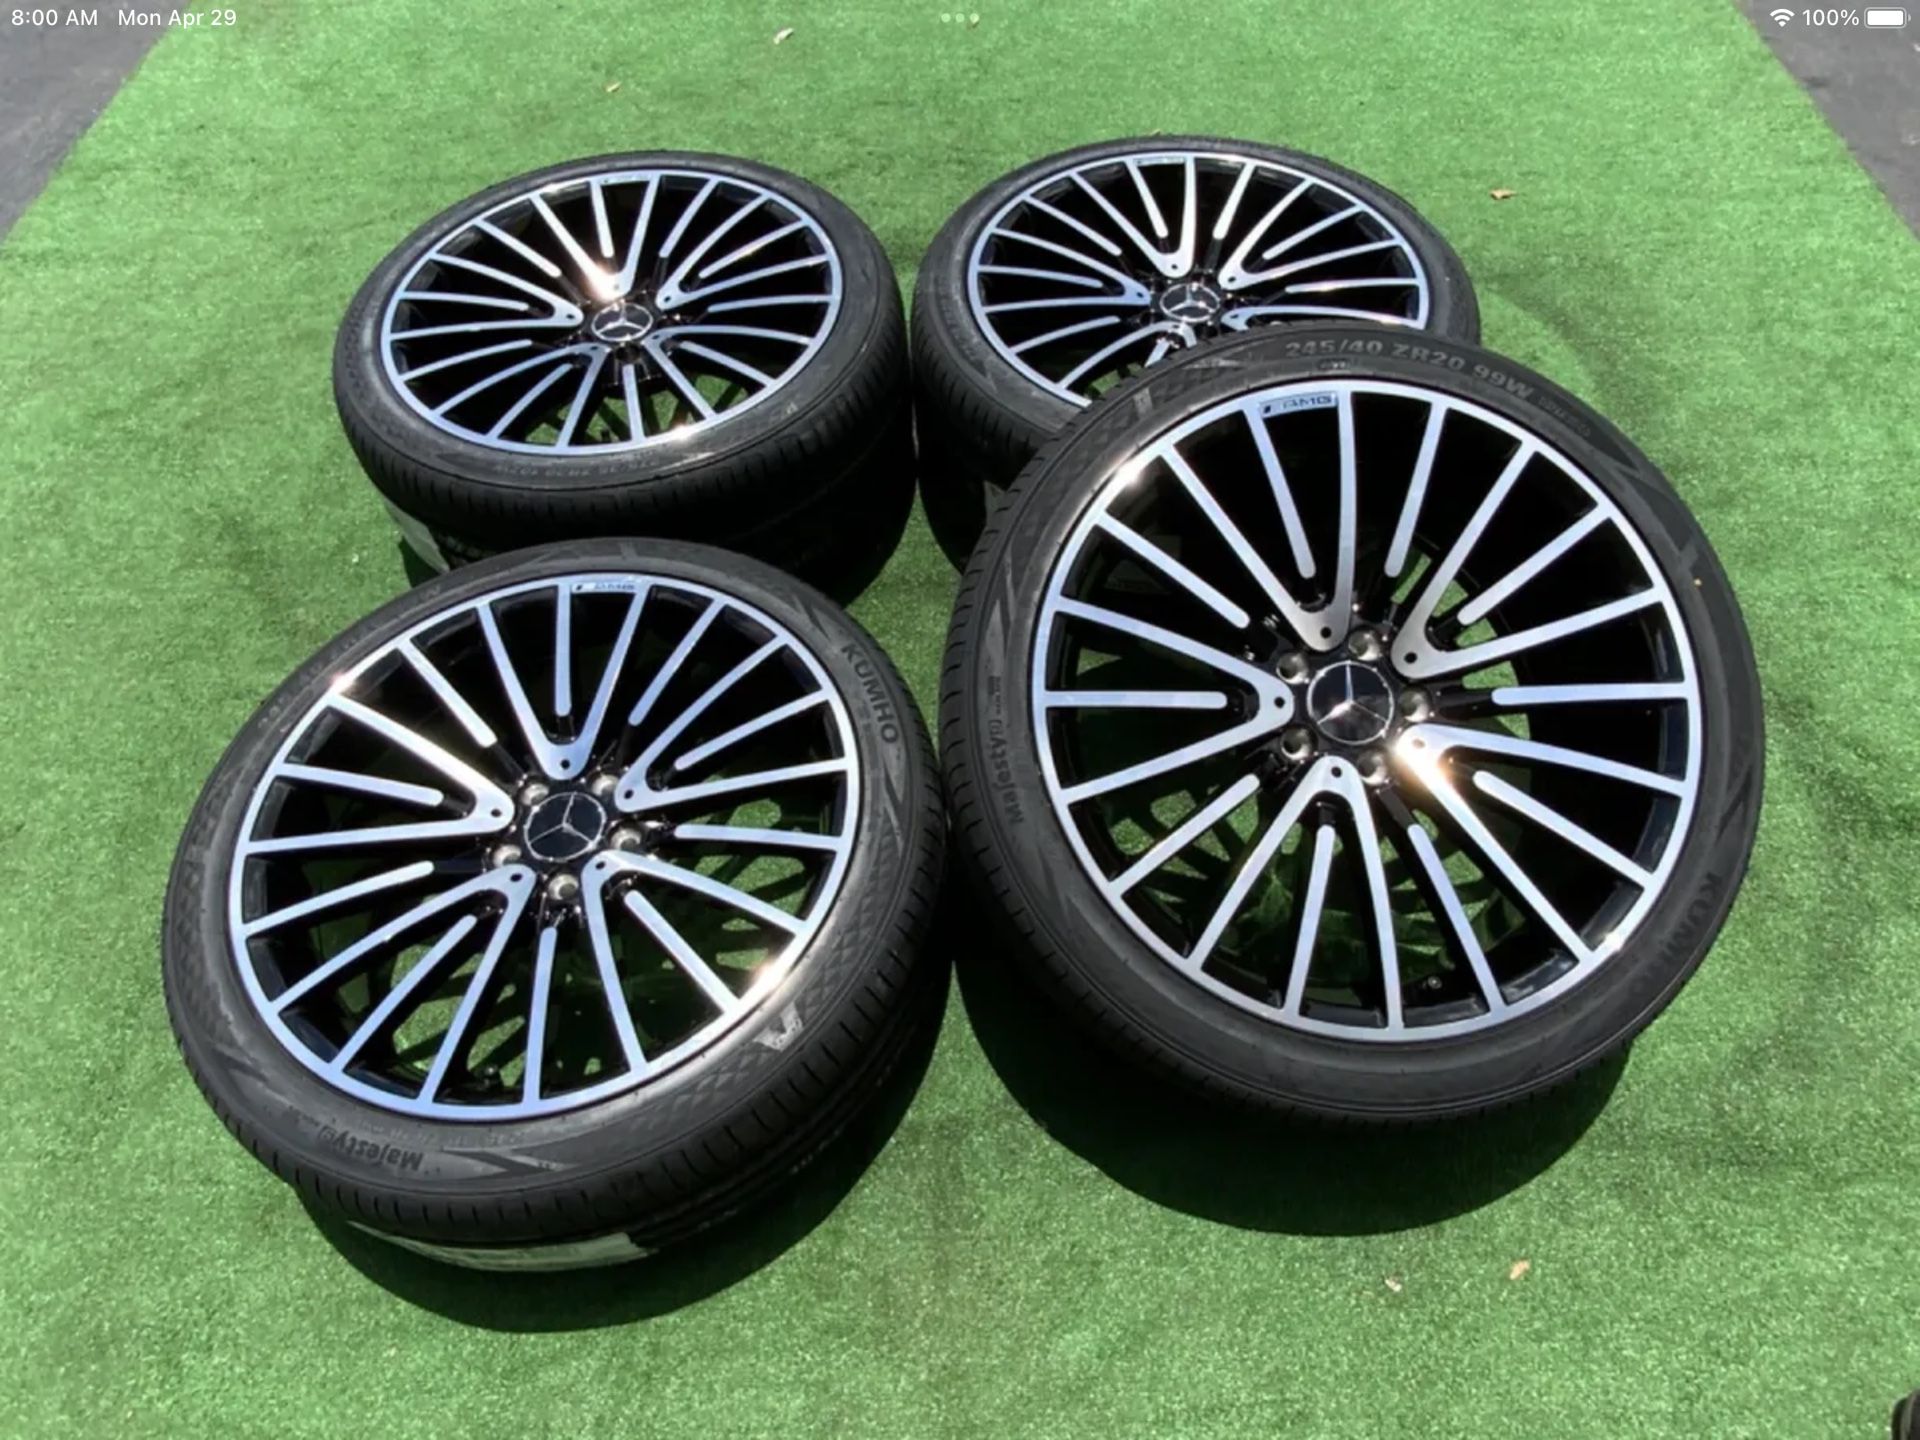  Mercedes-Benz S550 S560 S450 Wheels OE Style Rims AMG Tires Gloss Black